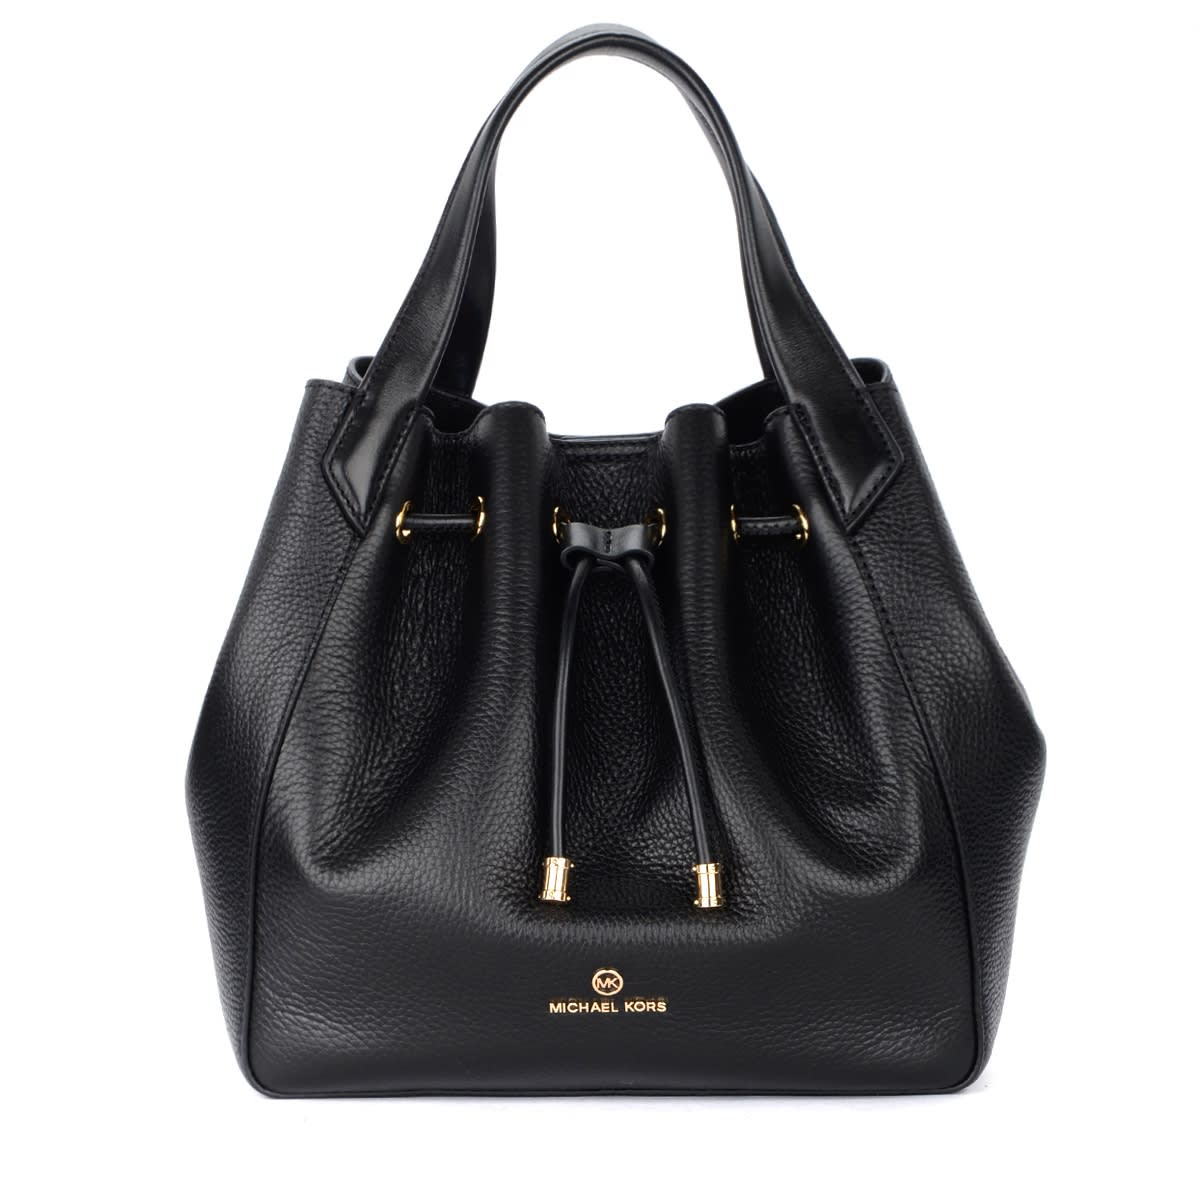 Michael Kors Phoebe Large Tote Bag In Black Grained Leather